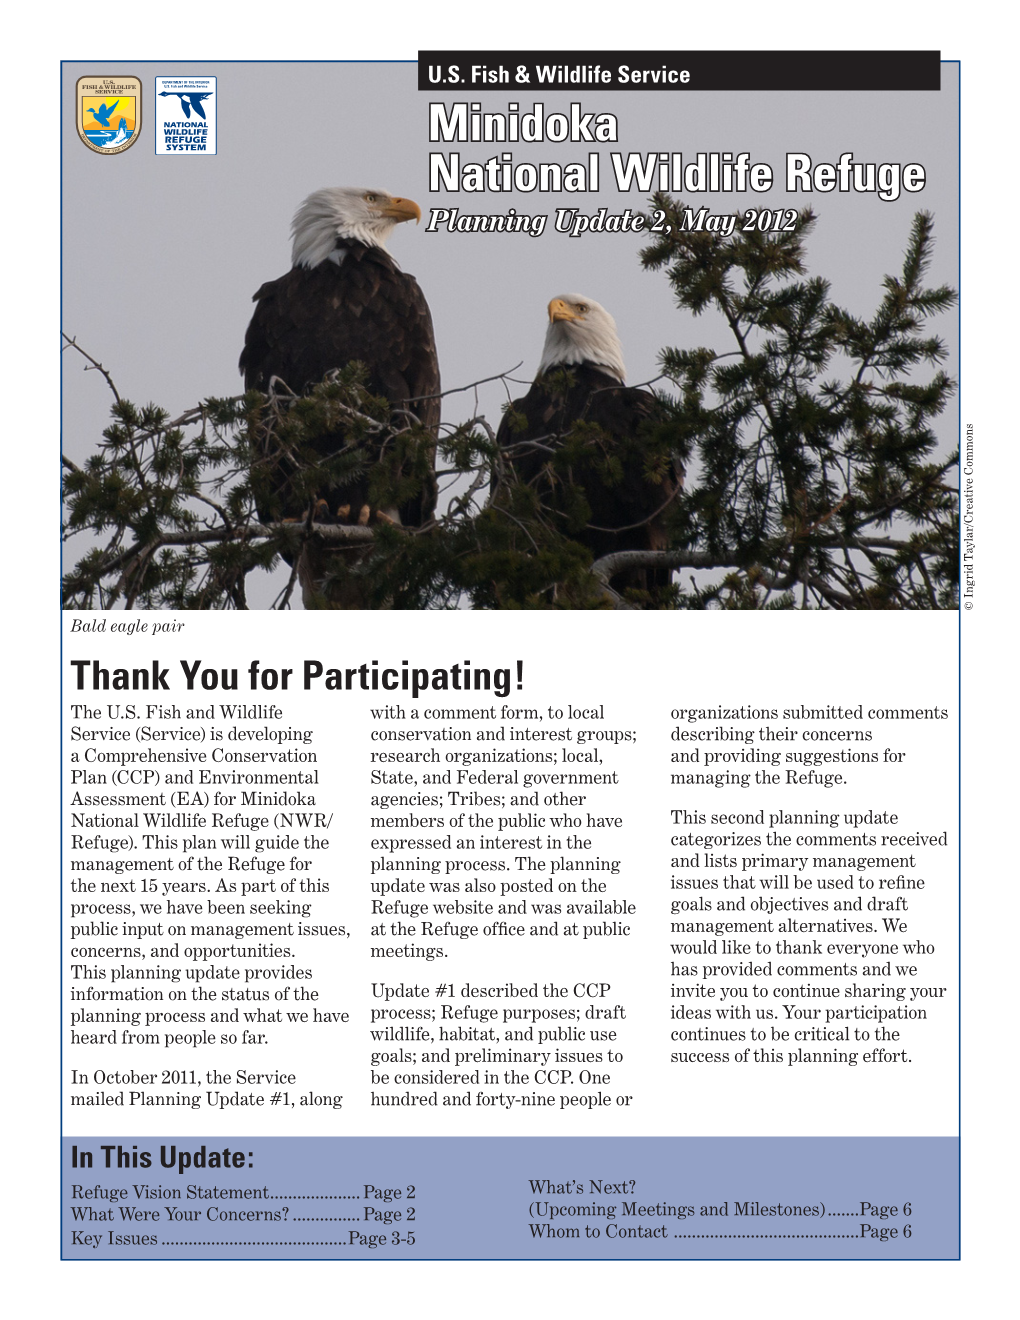 Minidoka National Wildlife Refuge Planning Update 2, May 2012 © Ingrid Taylar/Creative Commons Bald Eagle Pair Thank You for Participating! the U.S